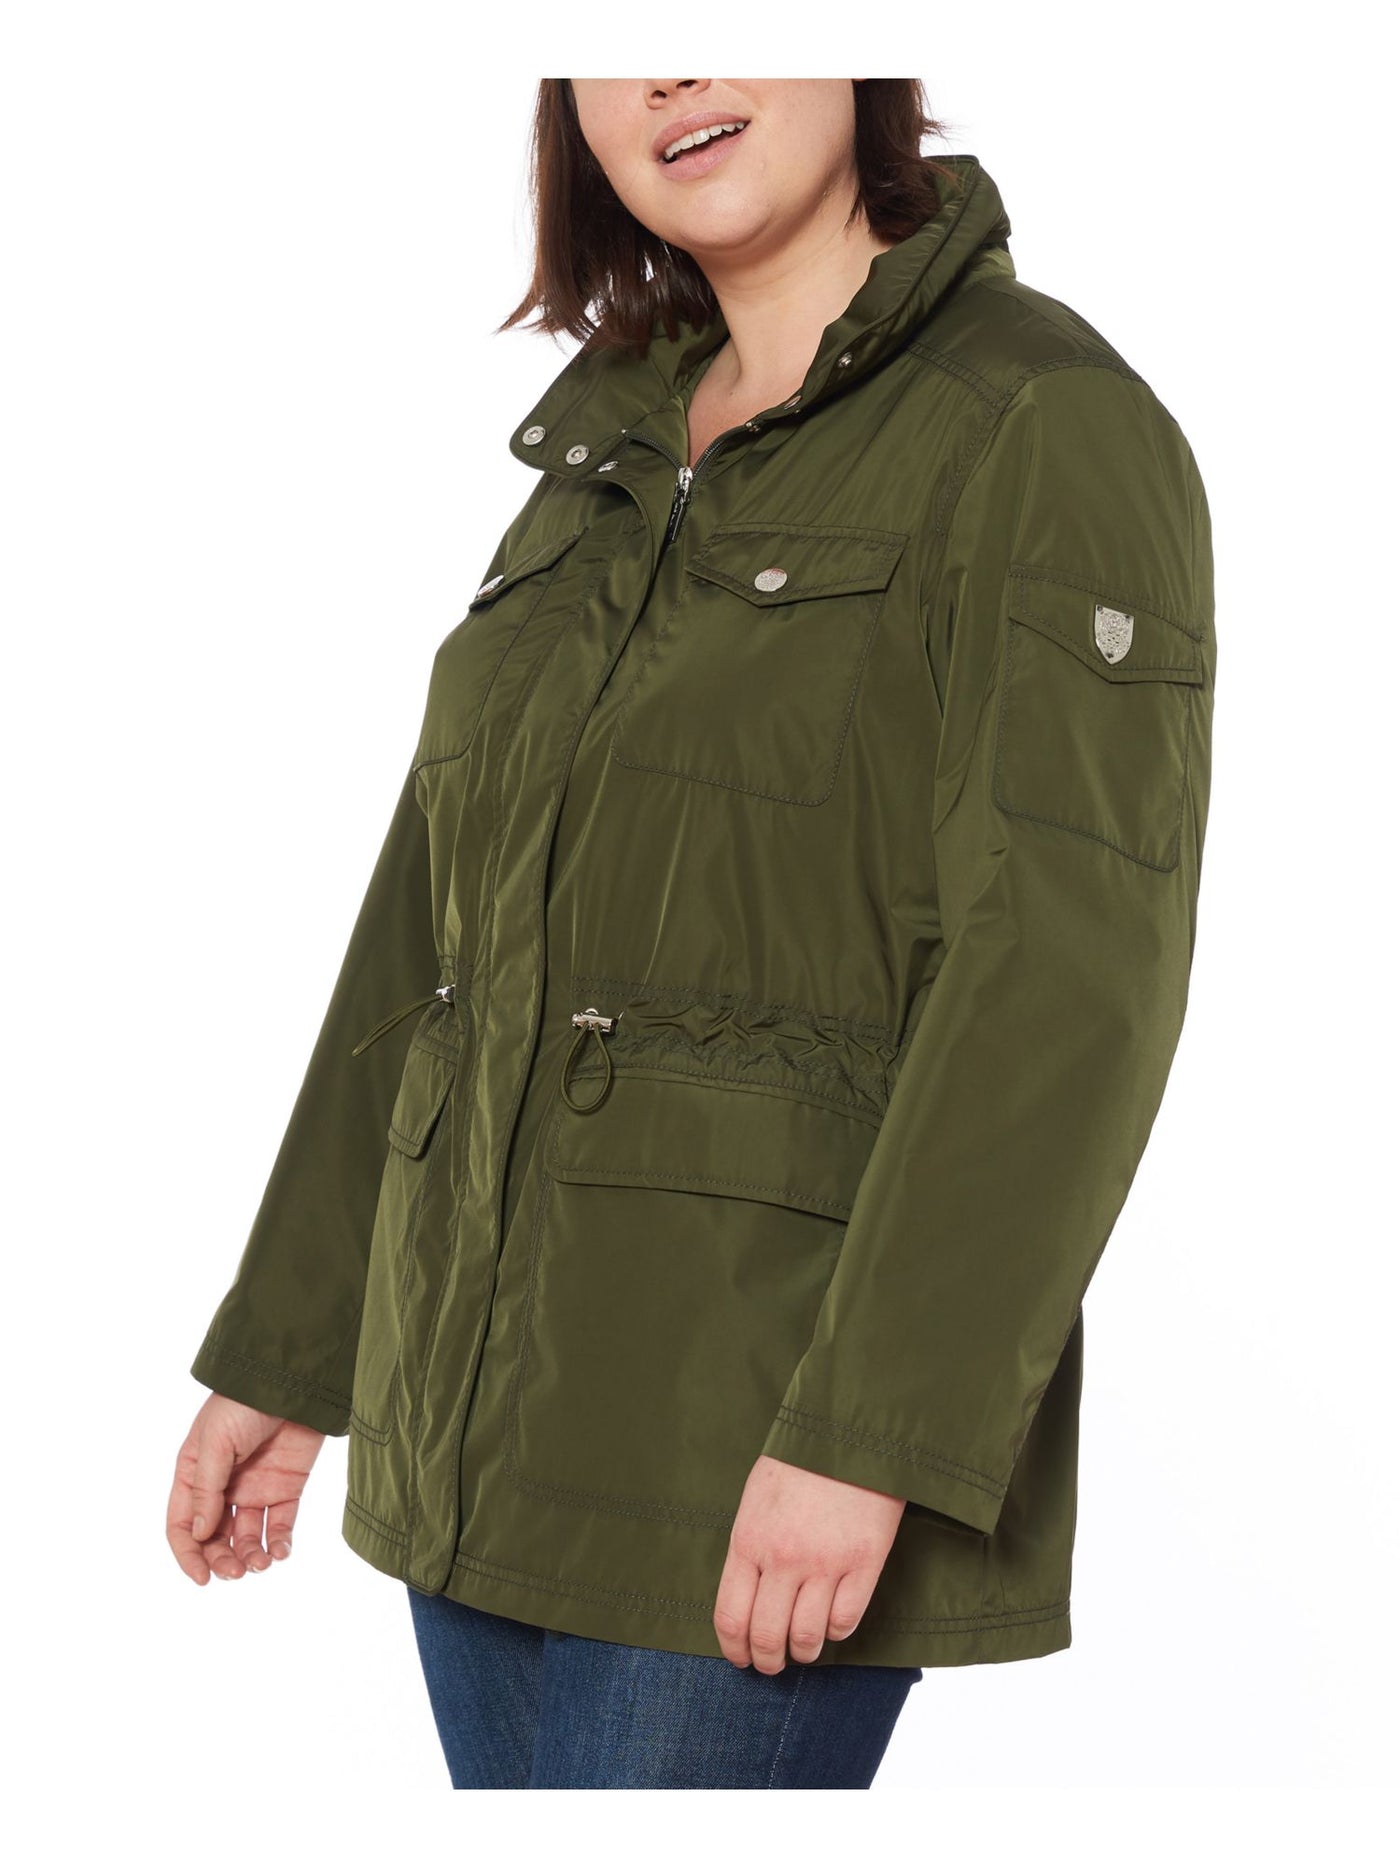 VINCE CAMUTO Womens Green Jacket Plus 0X